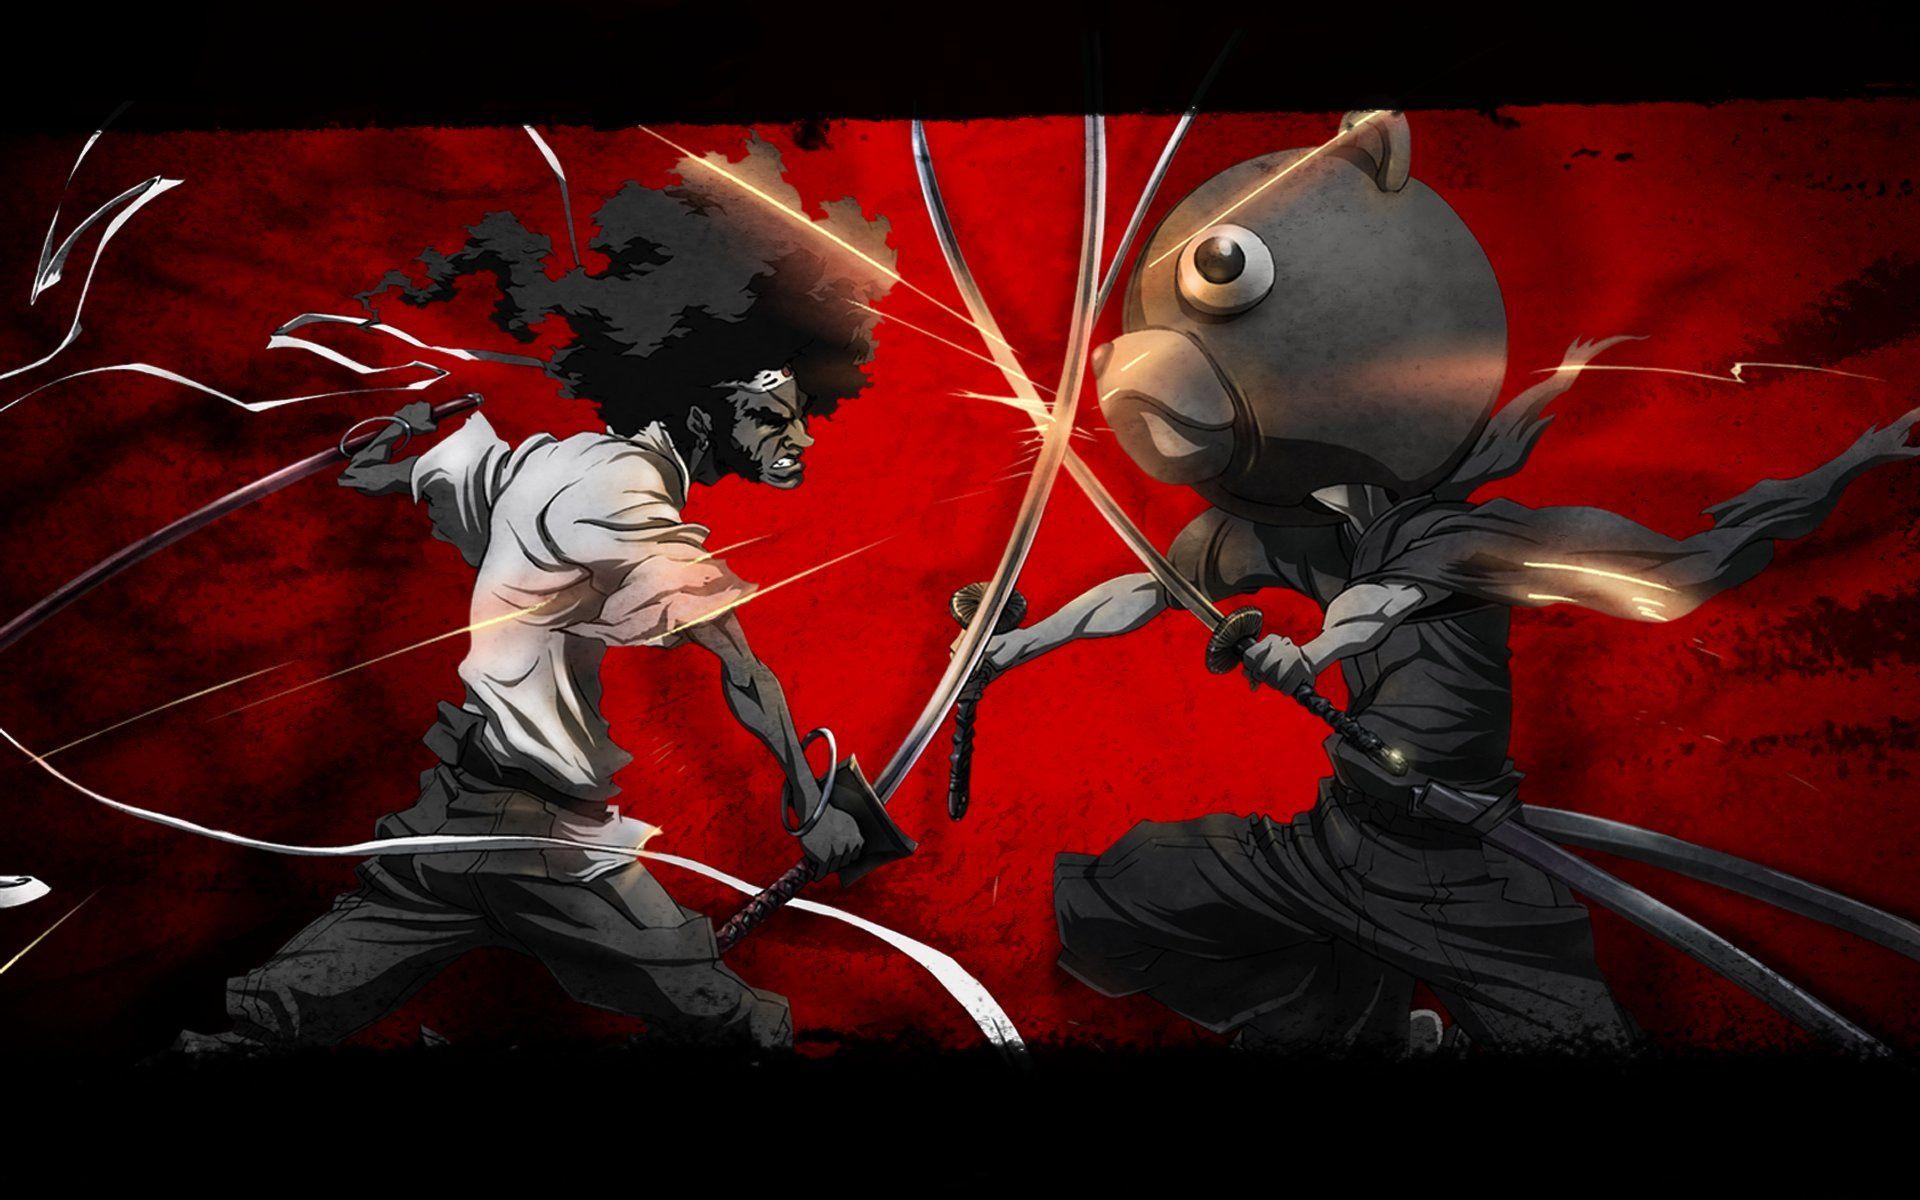 Epic Anime Fighting Wallpaper High Quality Resolution